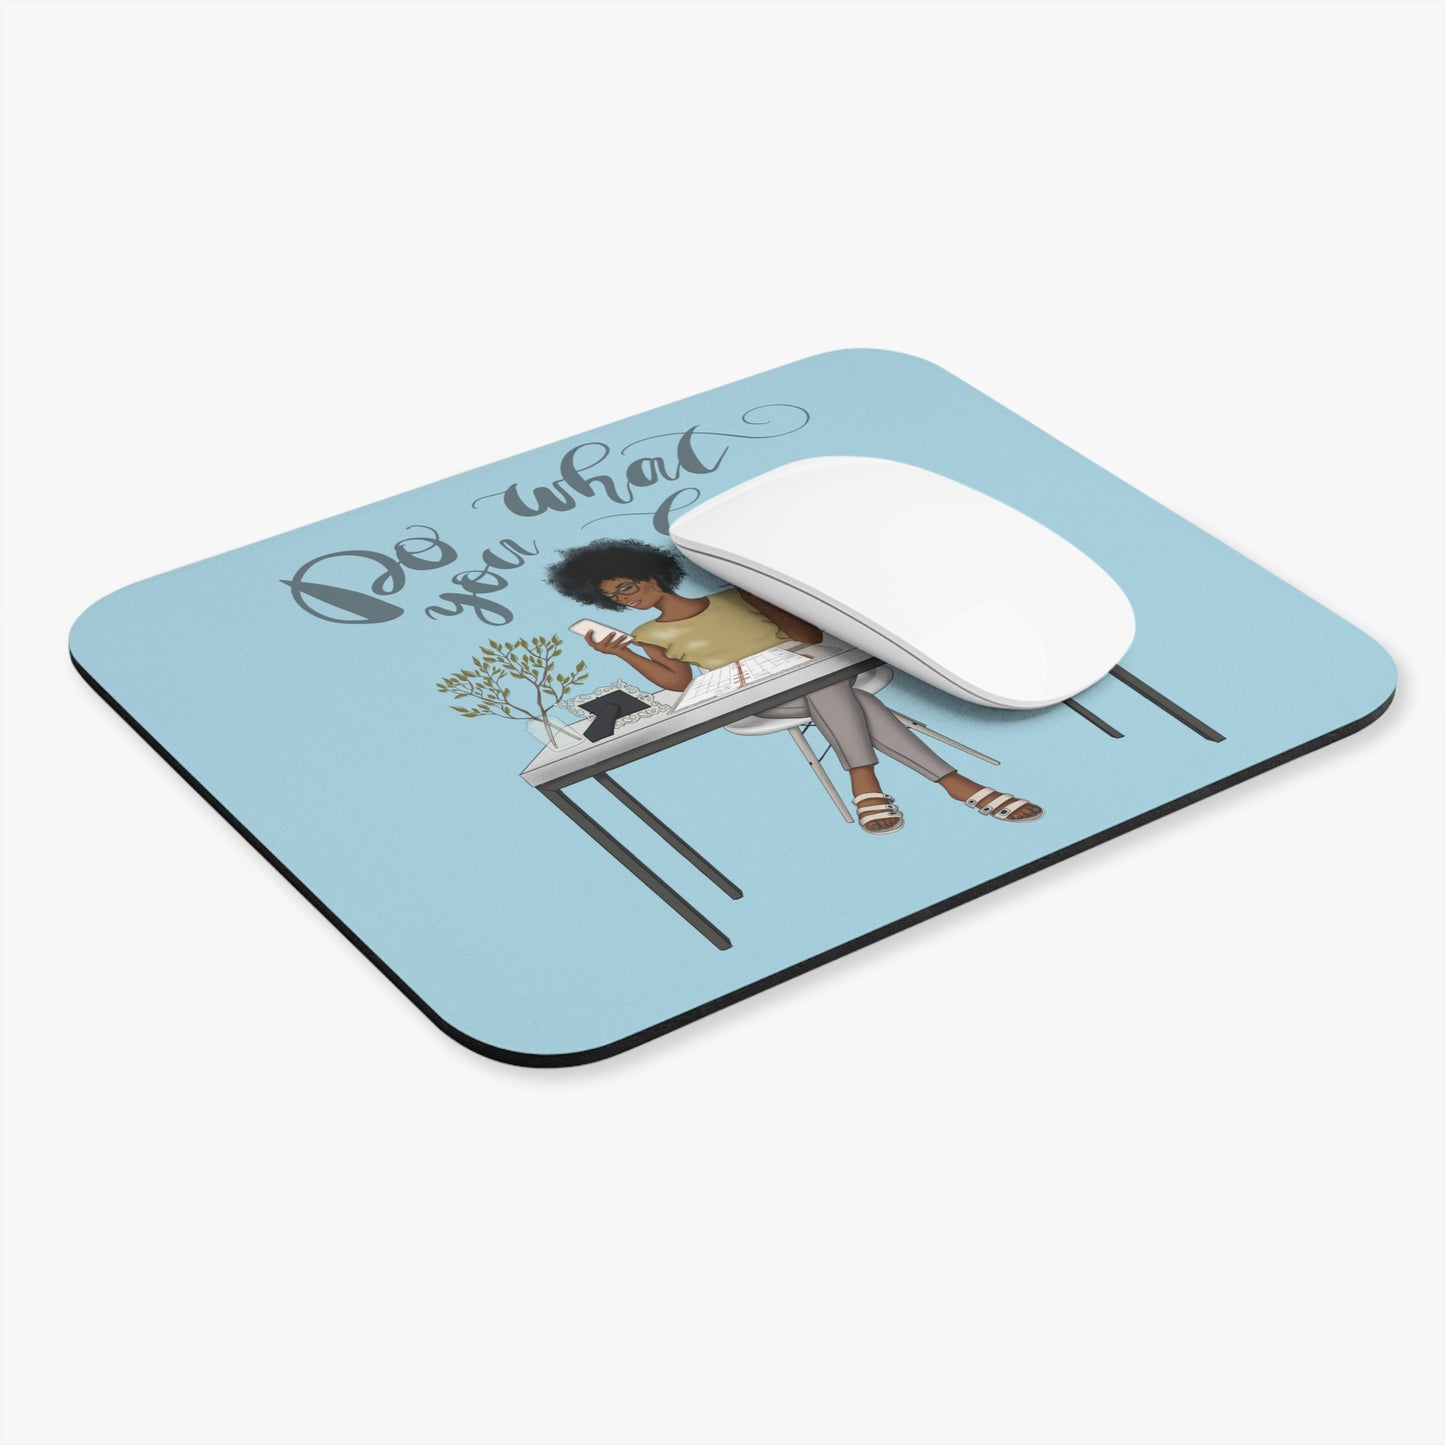 Do What You Love Mouse Pad - Textured Hair - Light Blue